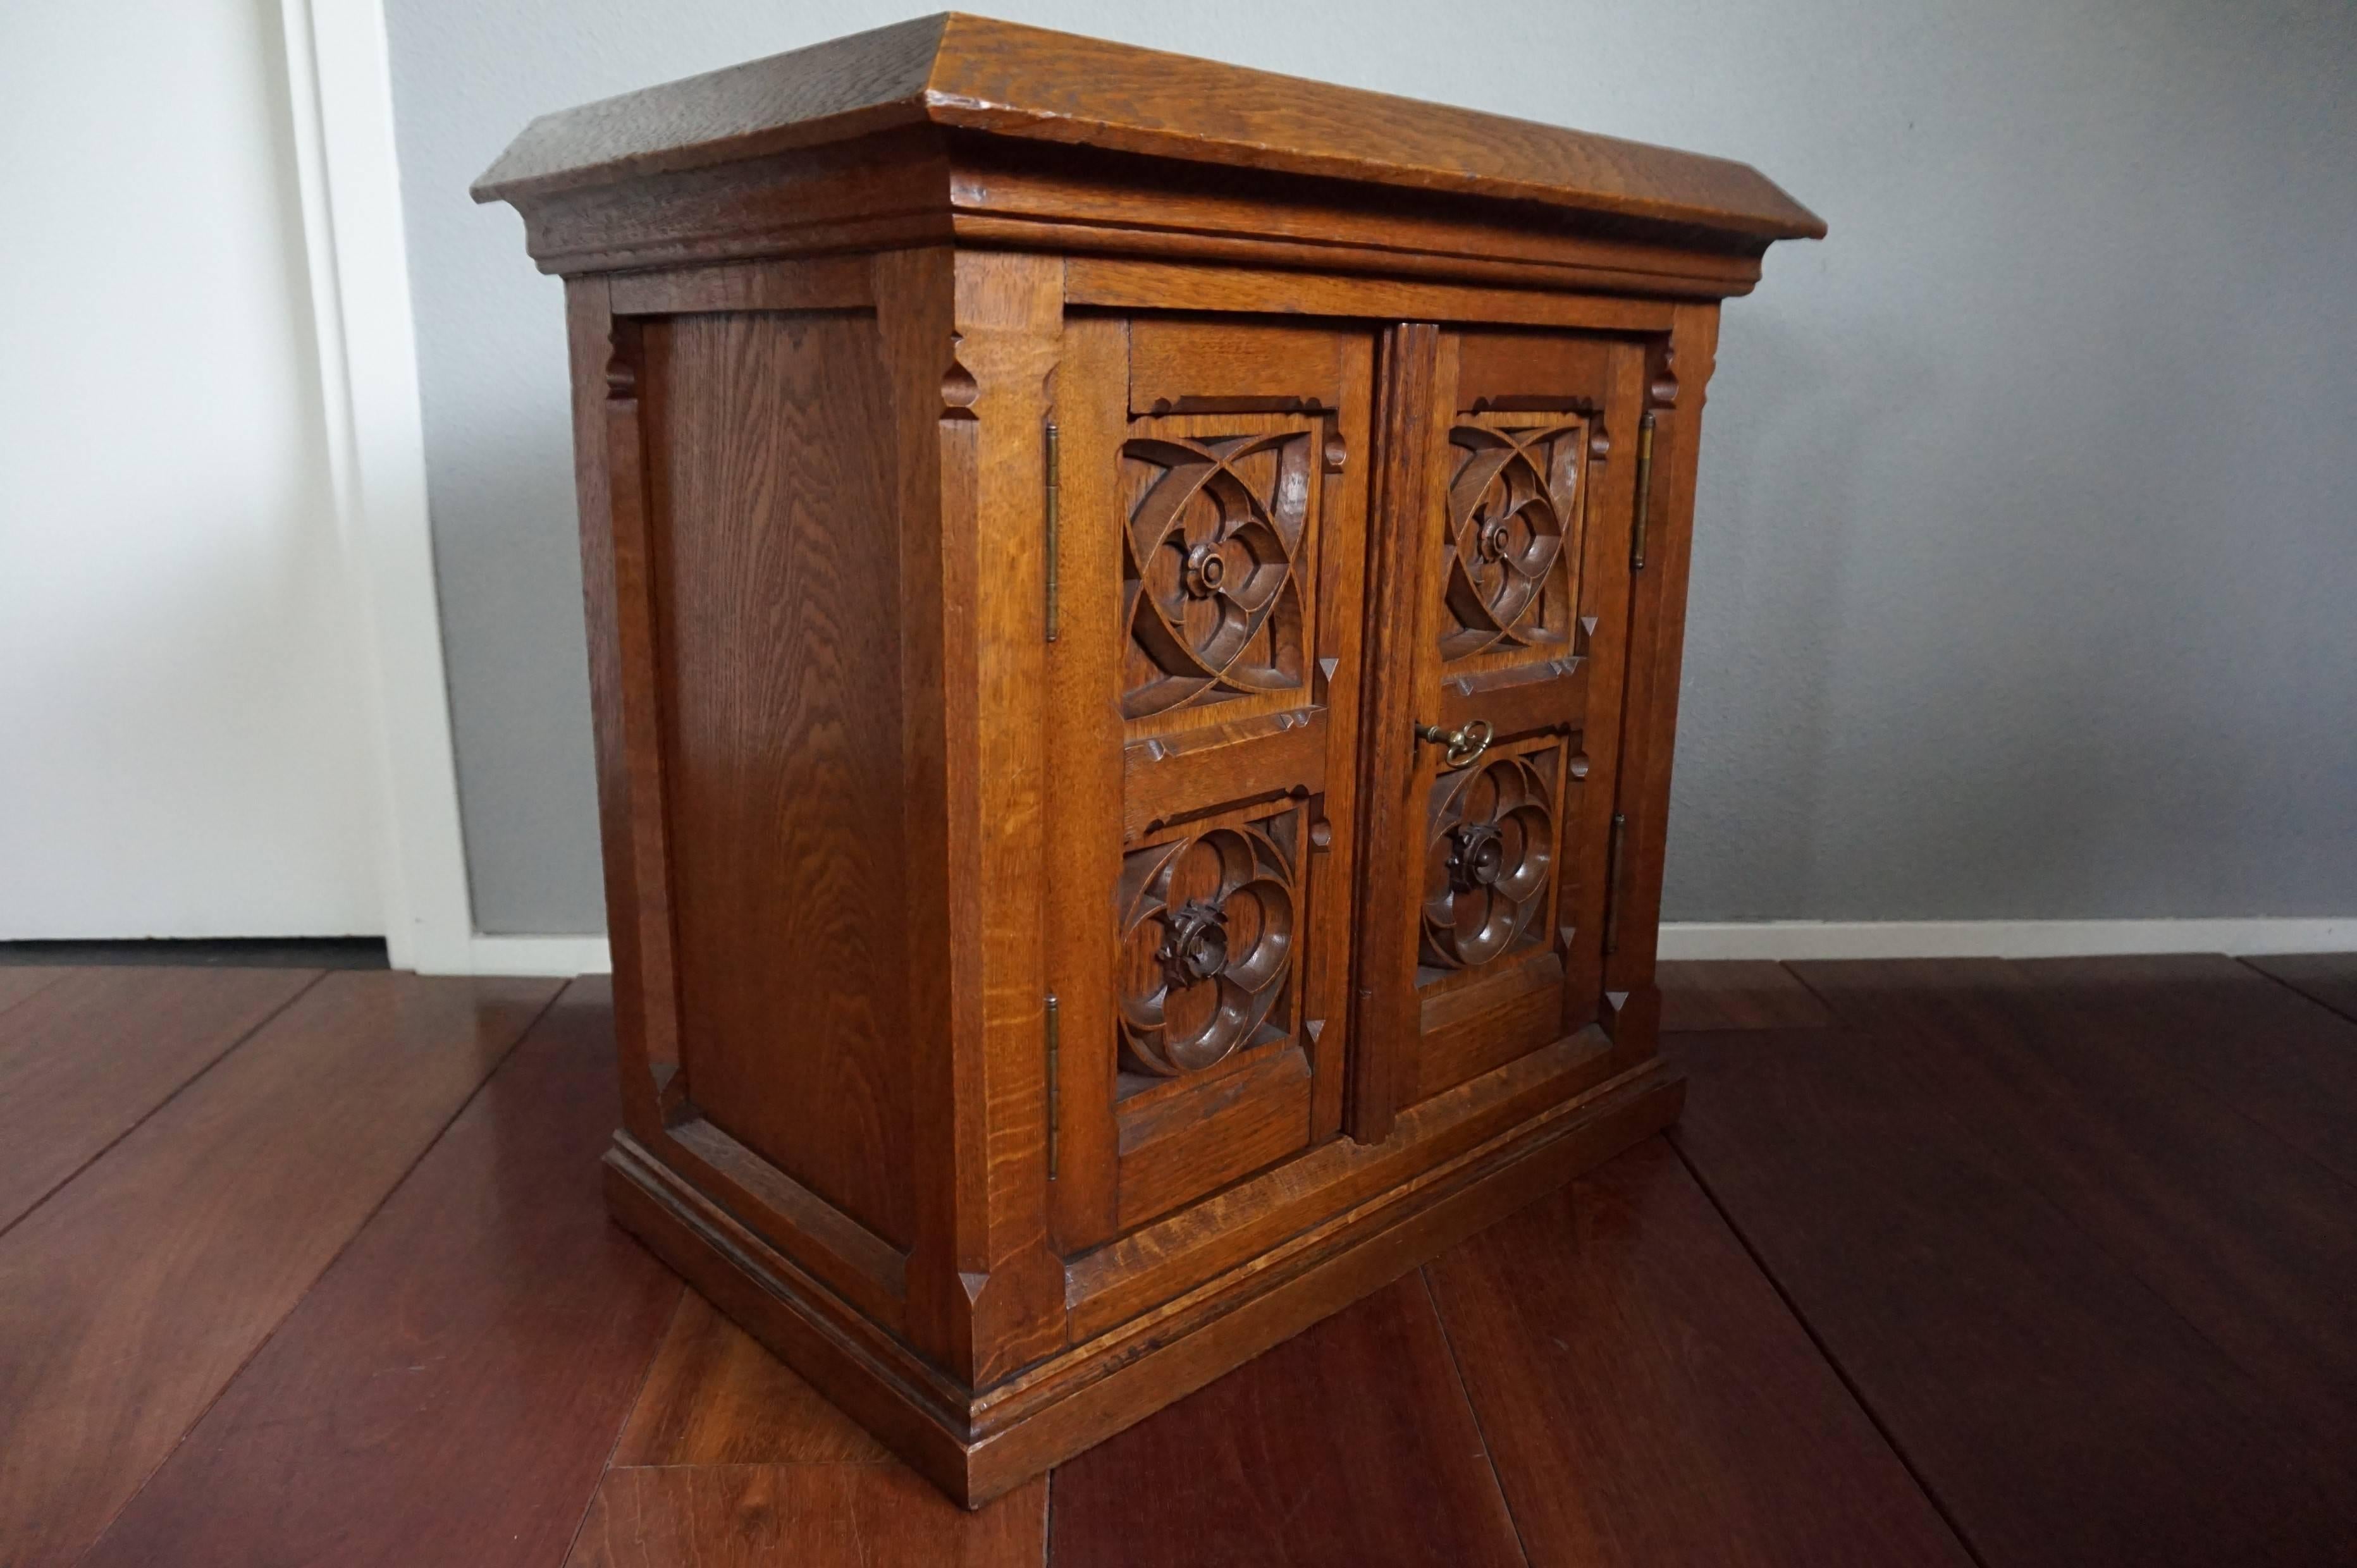 Oak Stunning Hand-Carved Gothic Revival Wall or Floor Cabinet with Wonderful Patina